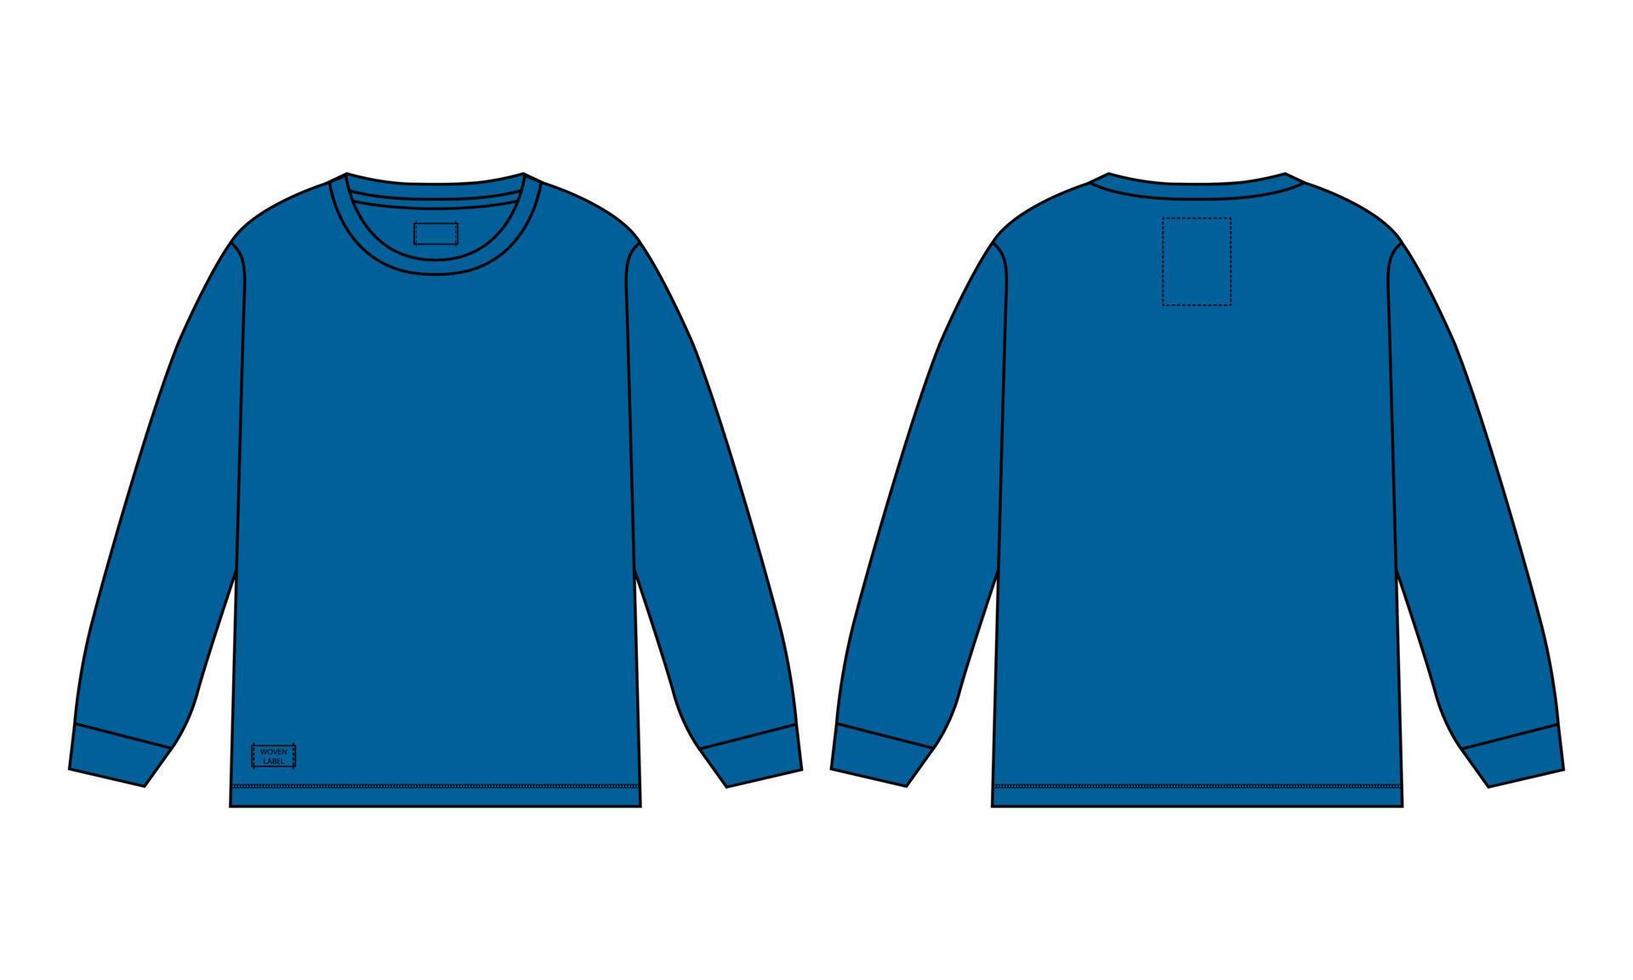 Long sleeve t shirt Technical Fashion flat sketch vector illustration blue color template Template Front and back views Isolated on white background.